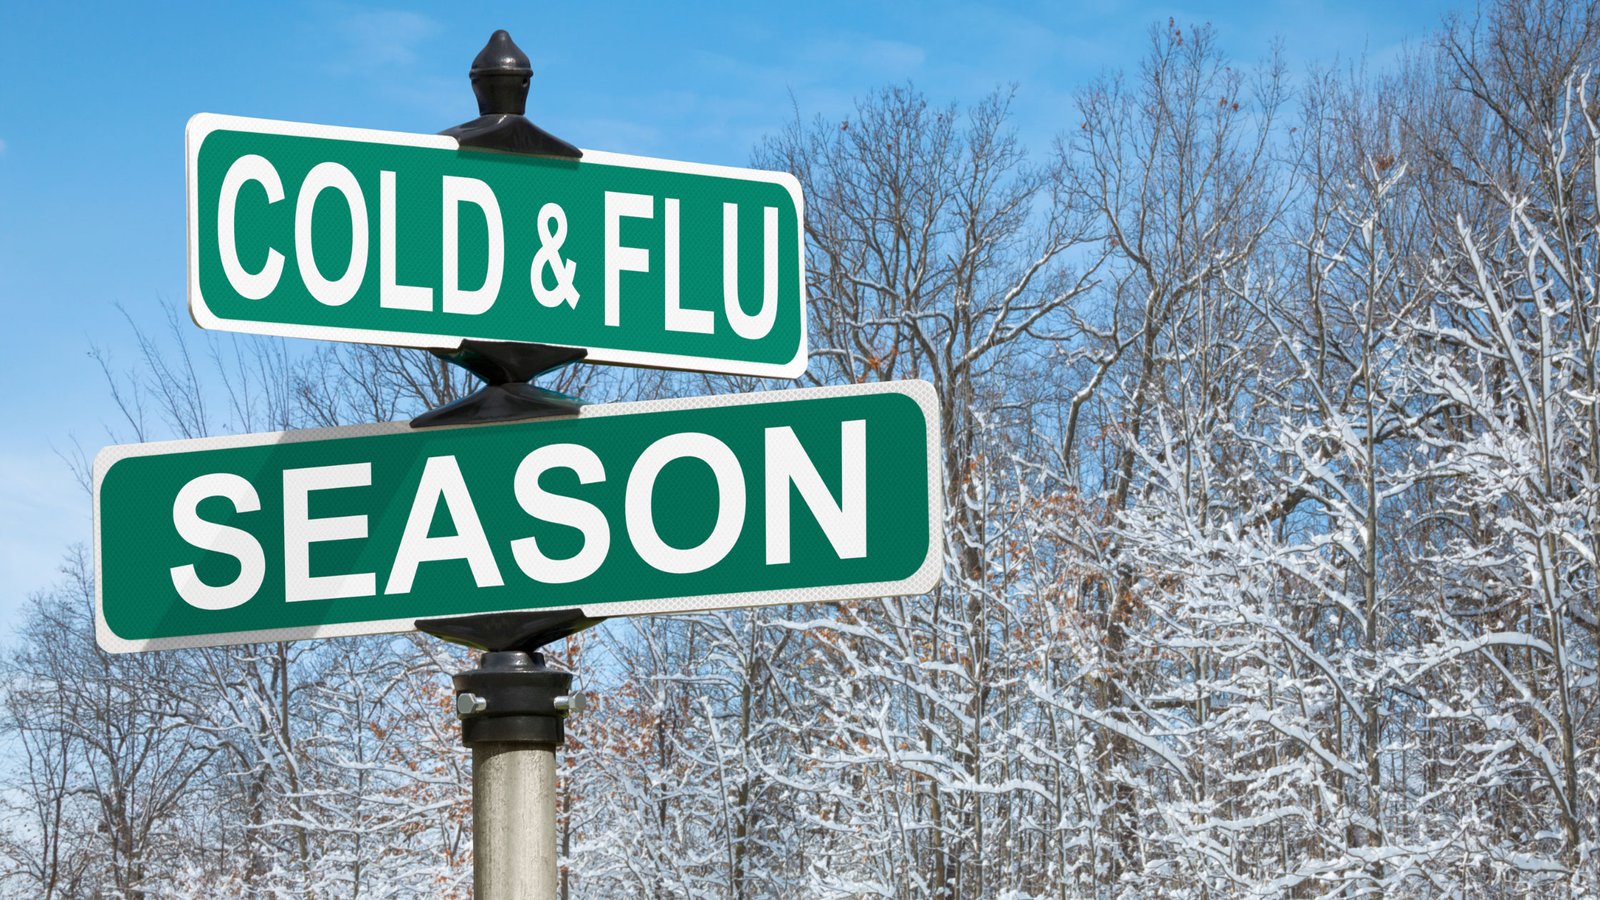 Cold and flu season signs on green